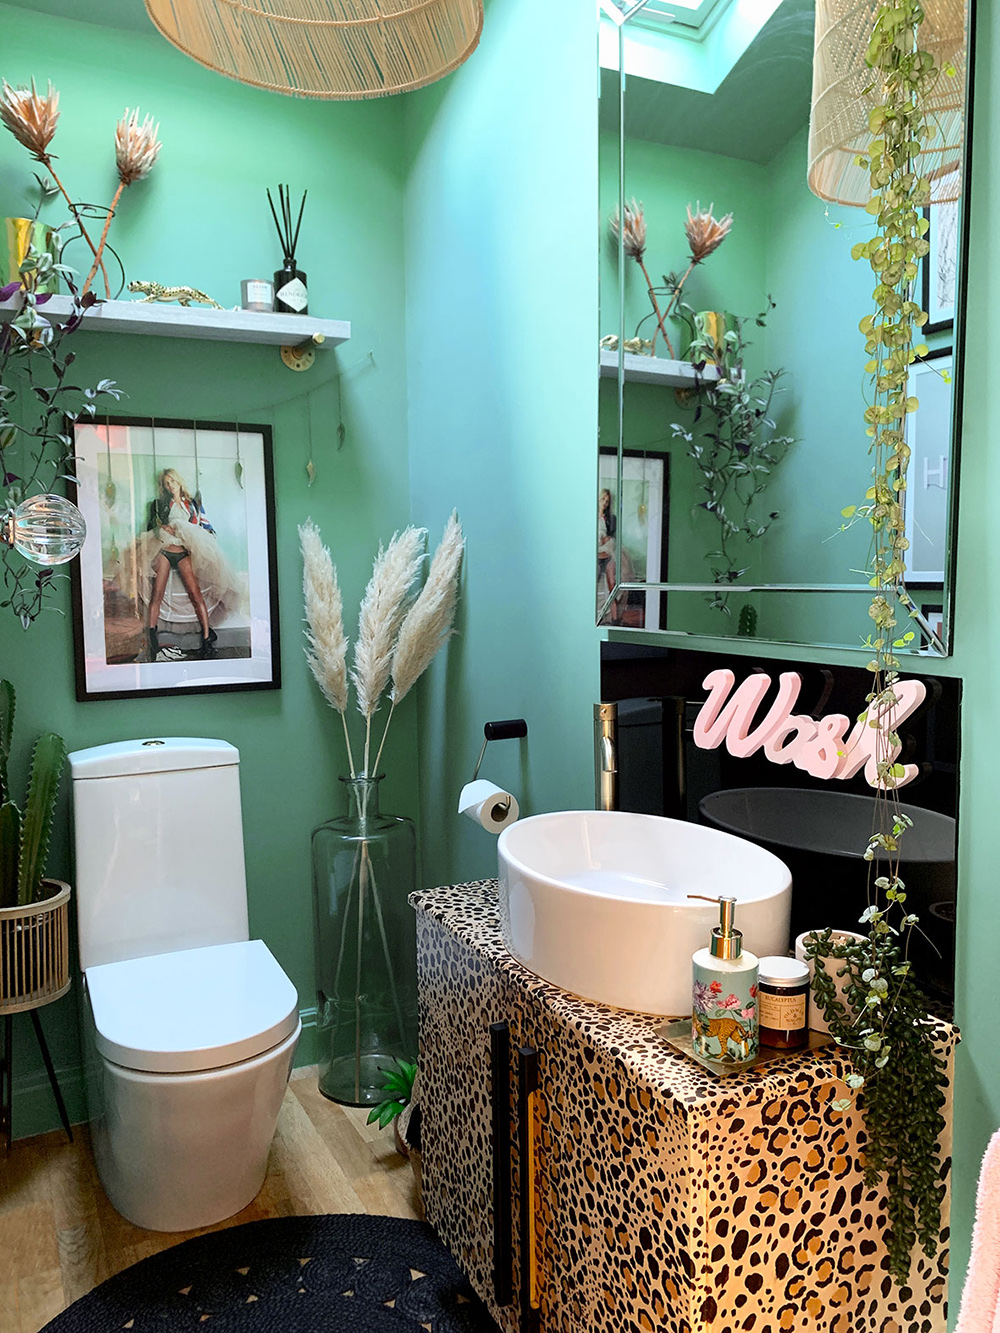 Quirky bathroom decor. Green and black colour palette with leopard print wash stand 